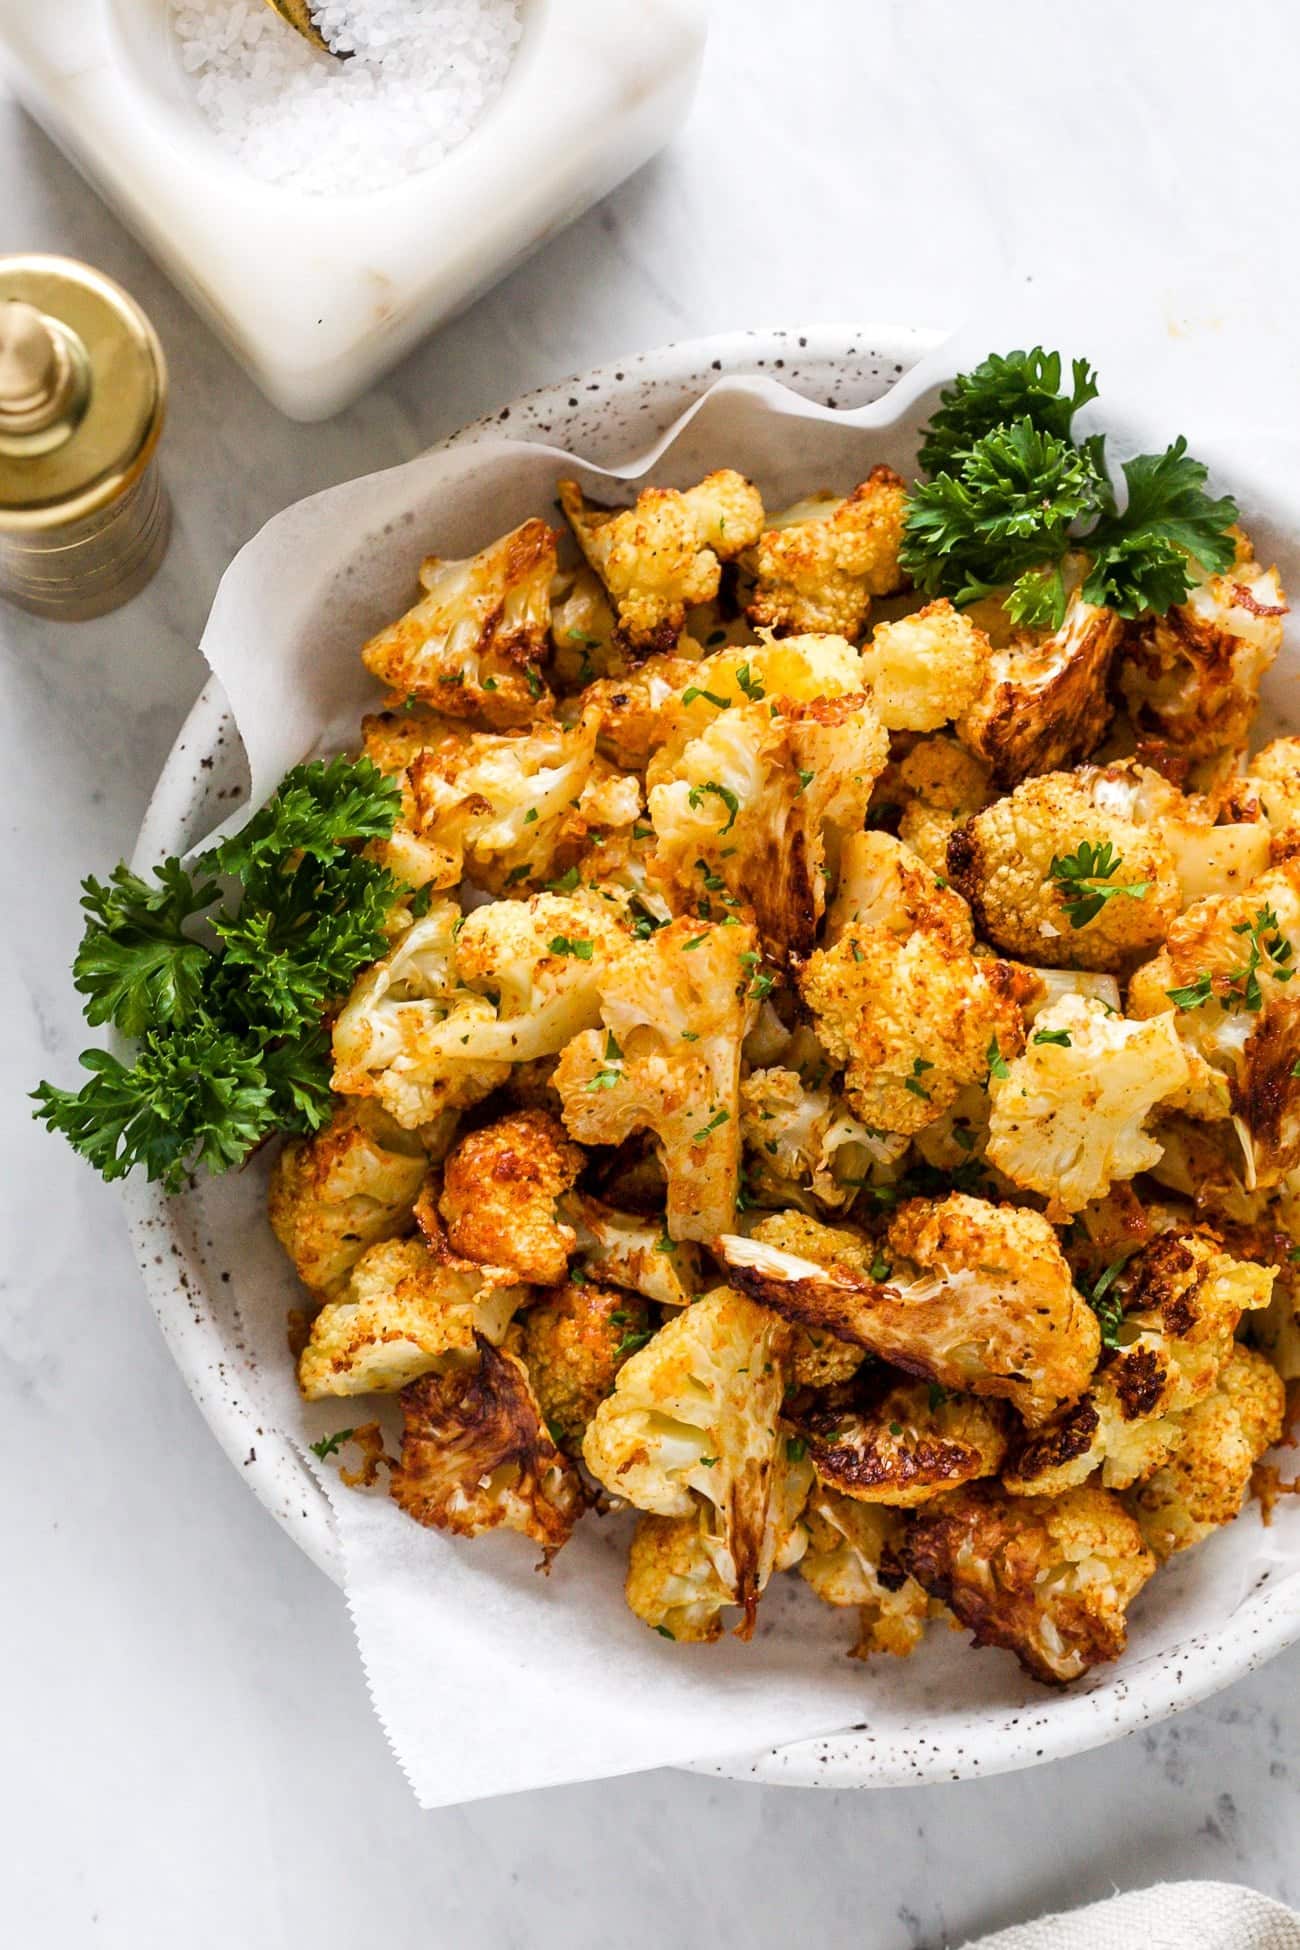 Roasted cauliflower in a white bowl with parsley.